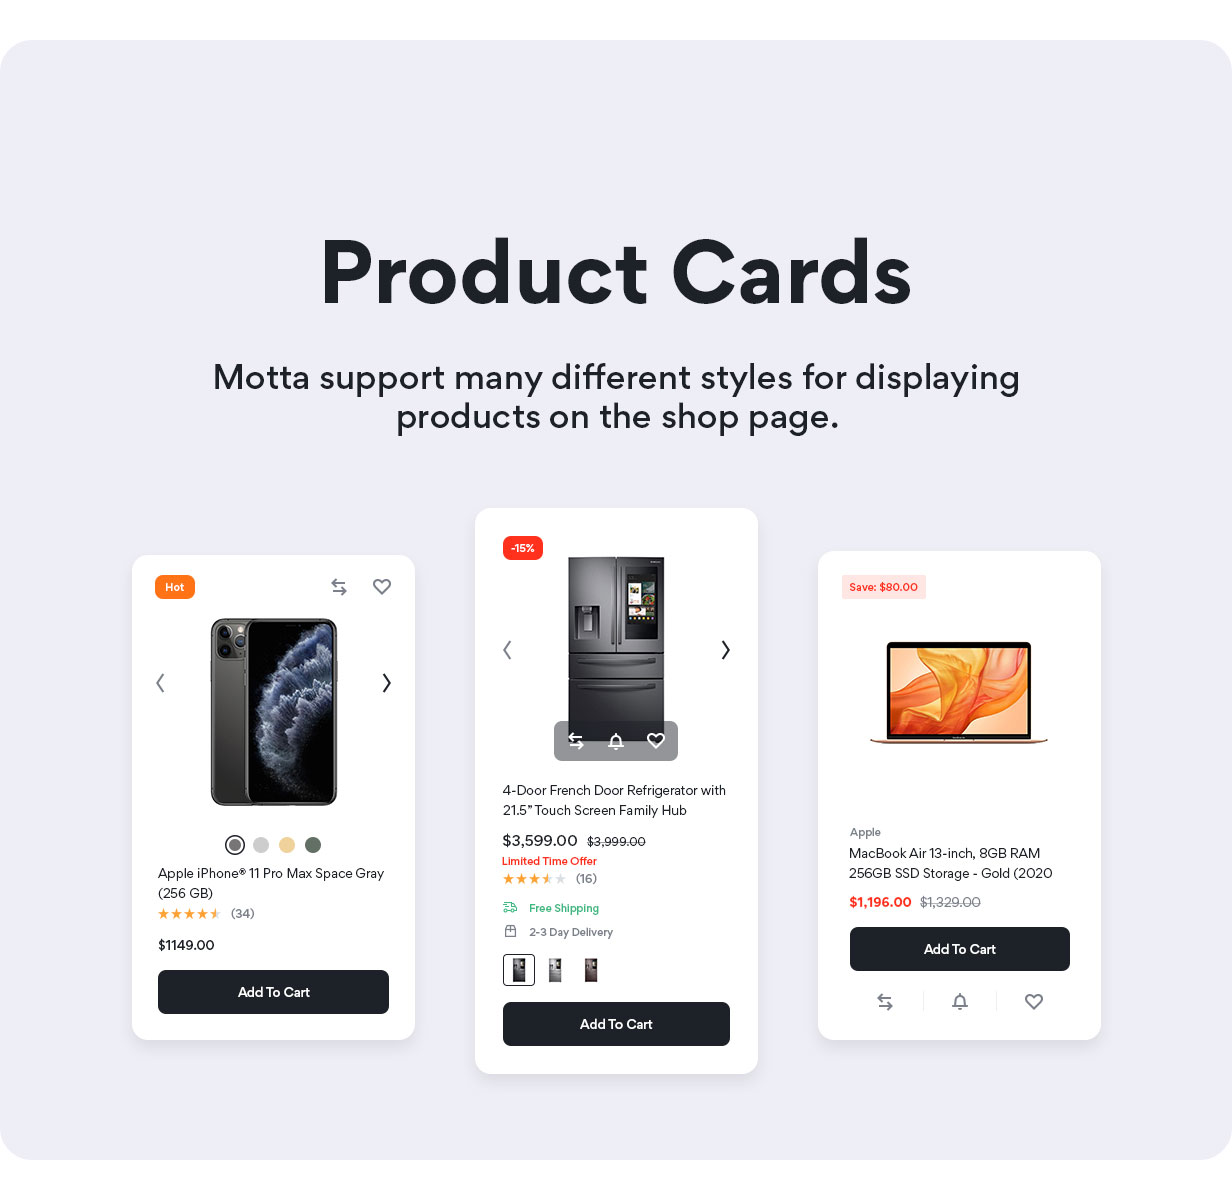 Motta WooCommerce theme - Many variations of product cards layout